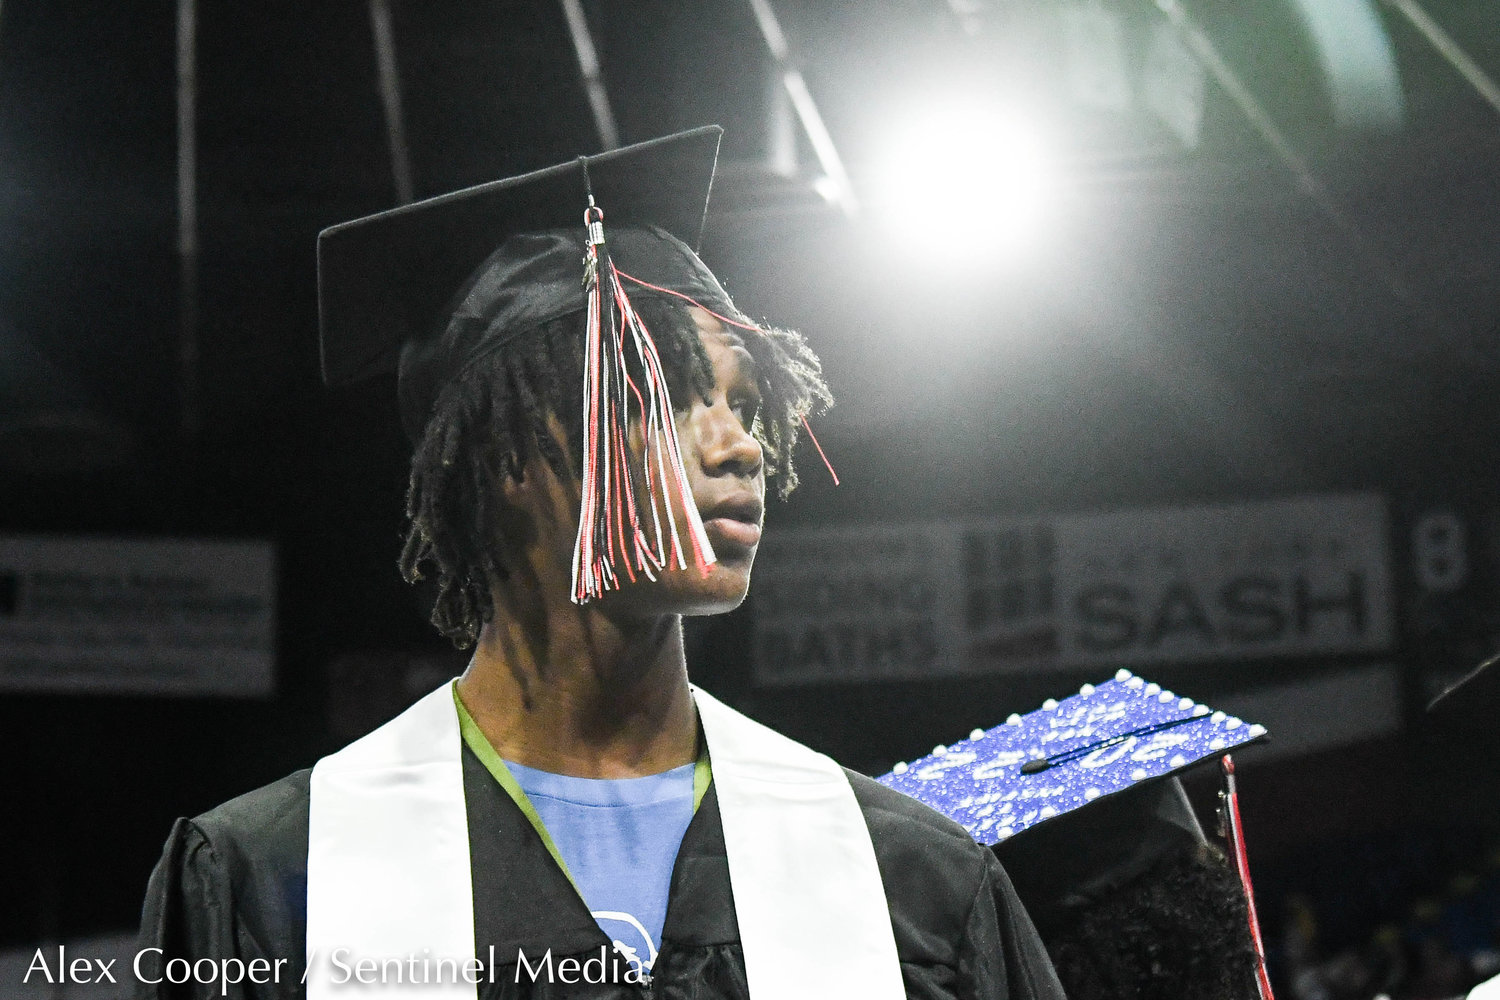 Graduate Deshawn Carter looks out onto the crowd during the annual commencement ceremony for Thomas R. Proctor High School on Friday at the Adirondack Bank Center at the Utica Memorial Auditorium.